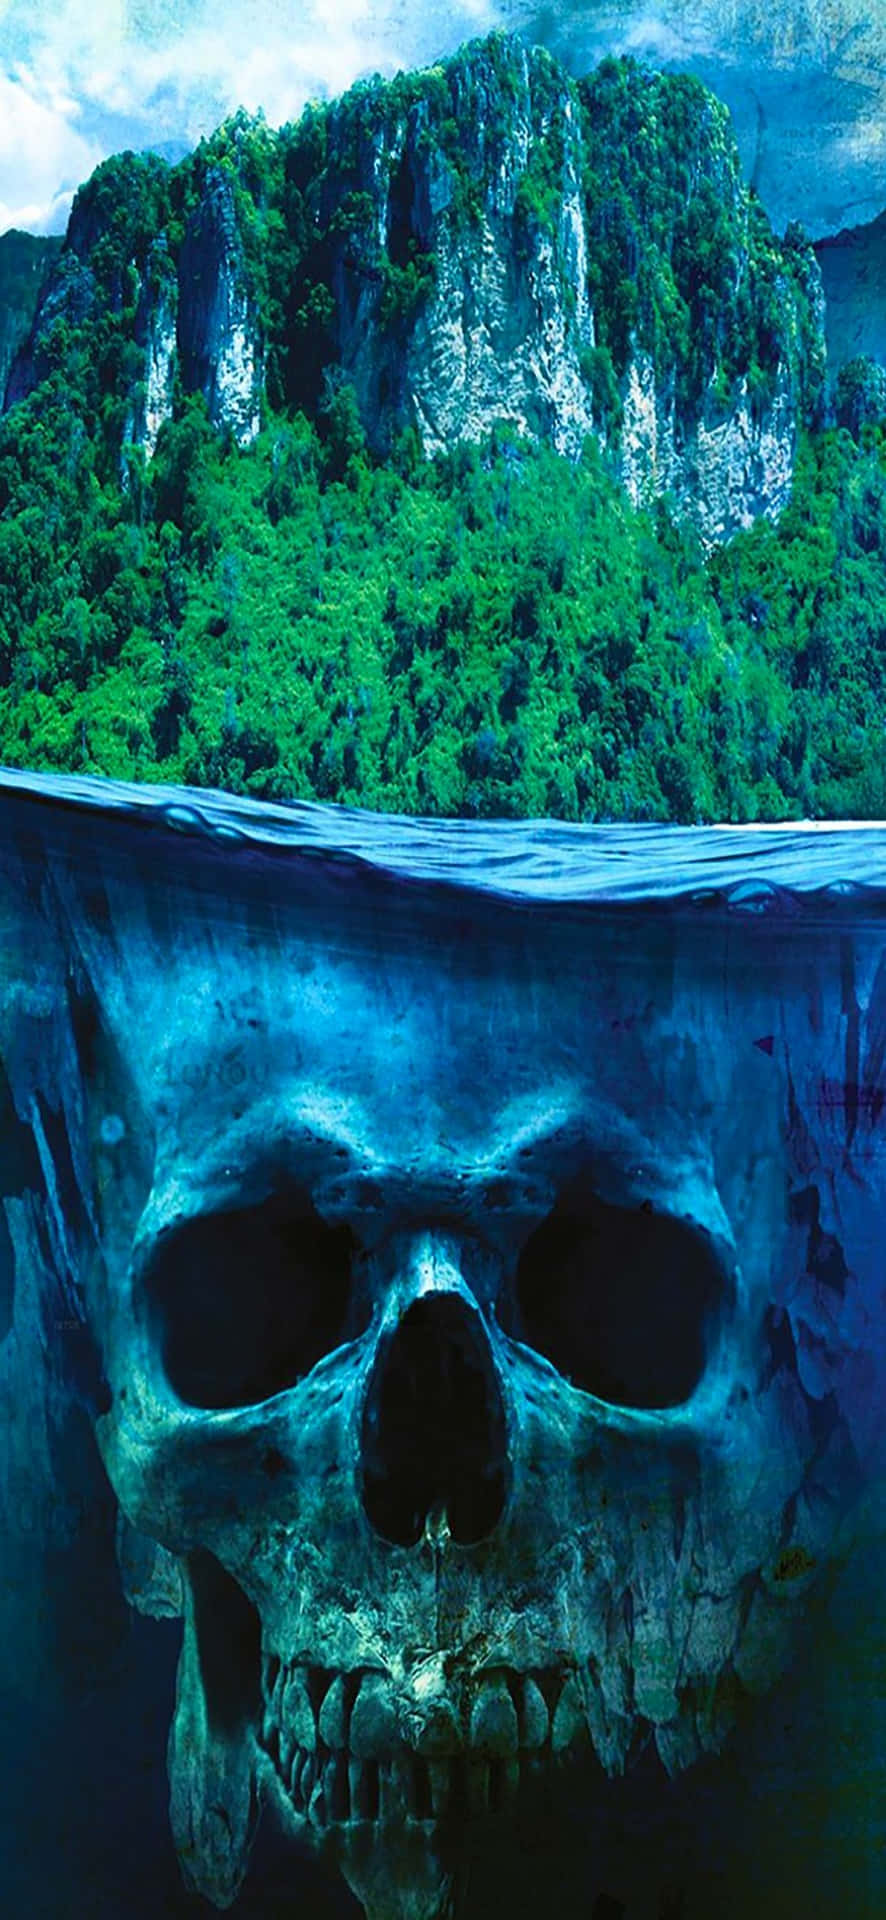 iPhone X Far Cry 3 Rook Islands Skull Background